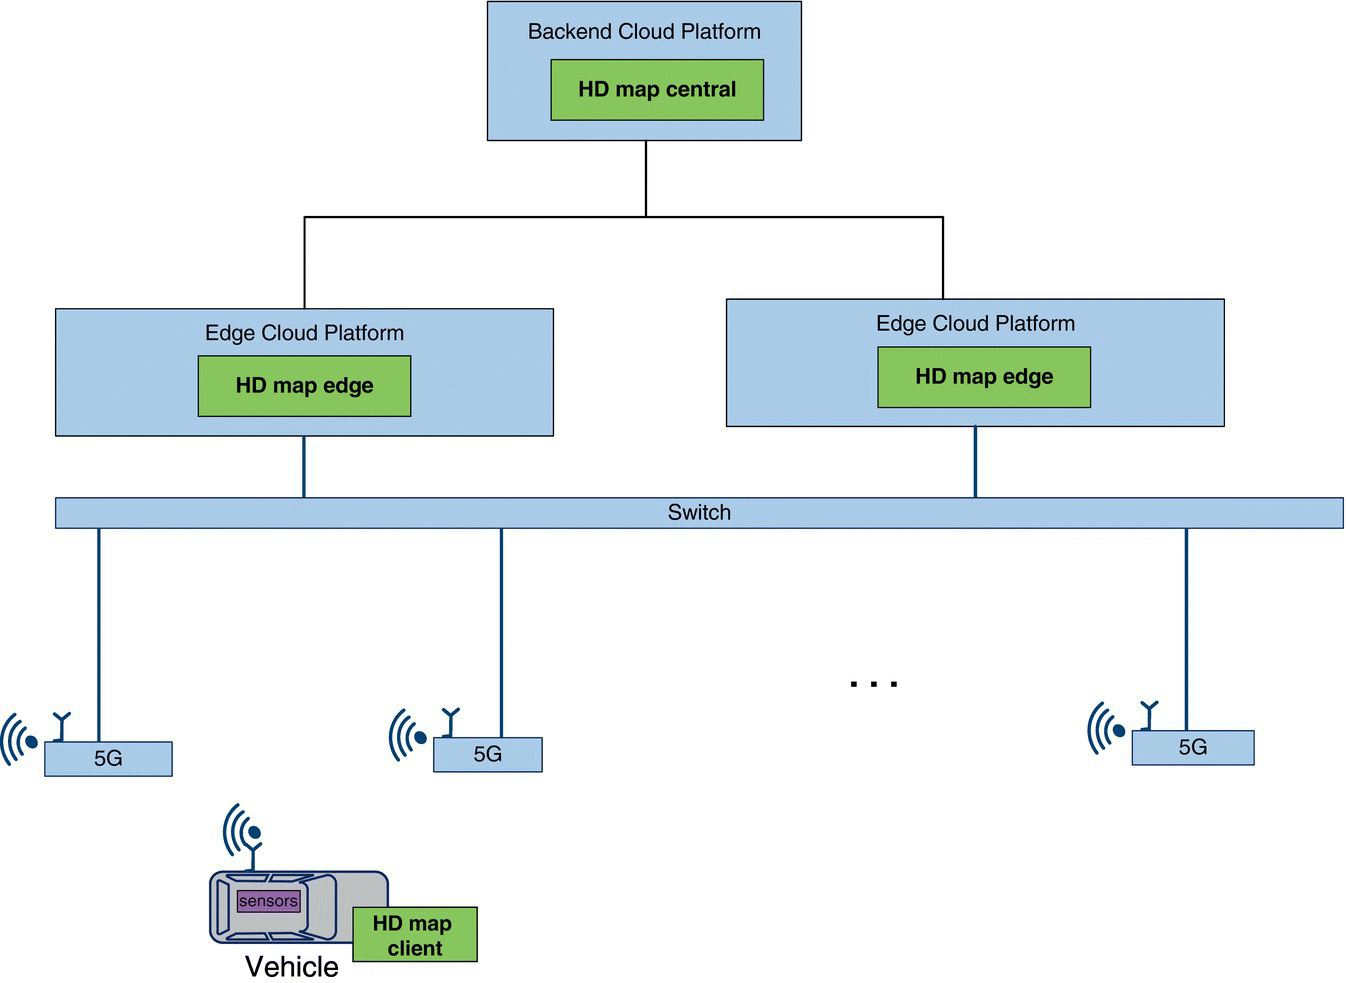 Schematic displaying a rectangle for backed cloud platform having a box for HD map central linking to 2 rectangles for edge cloud platform each having a box for HD map edge. A vehicle with a box for HD map client is at the bottom.